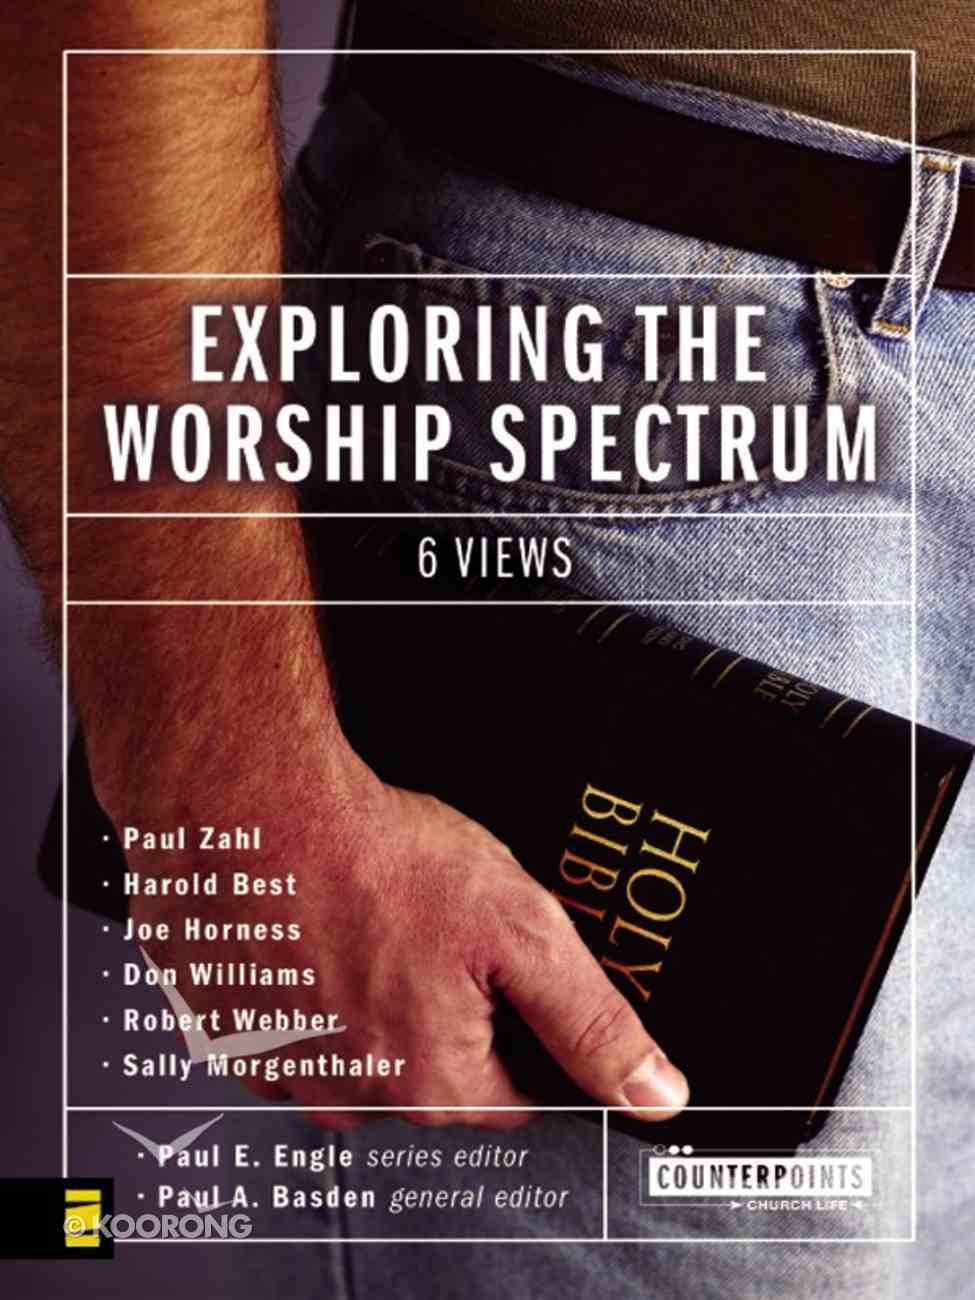 Exploring the Worship Spectrum (Counterpoints Series) eBook